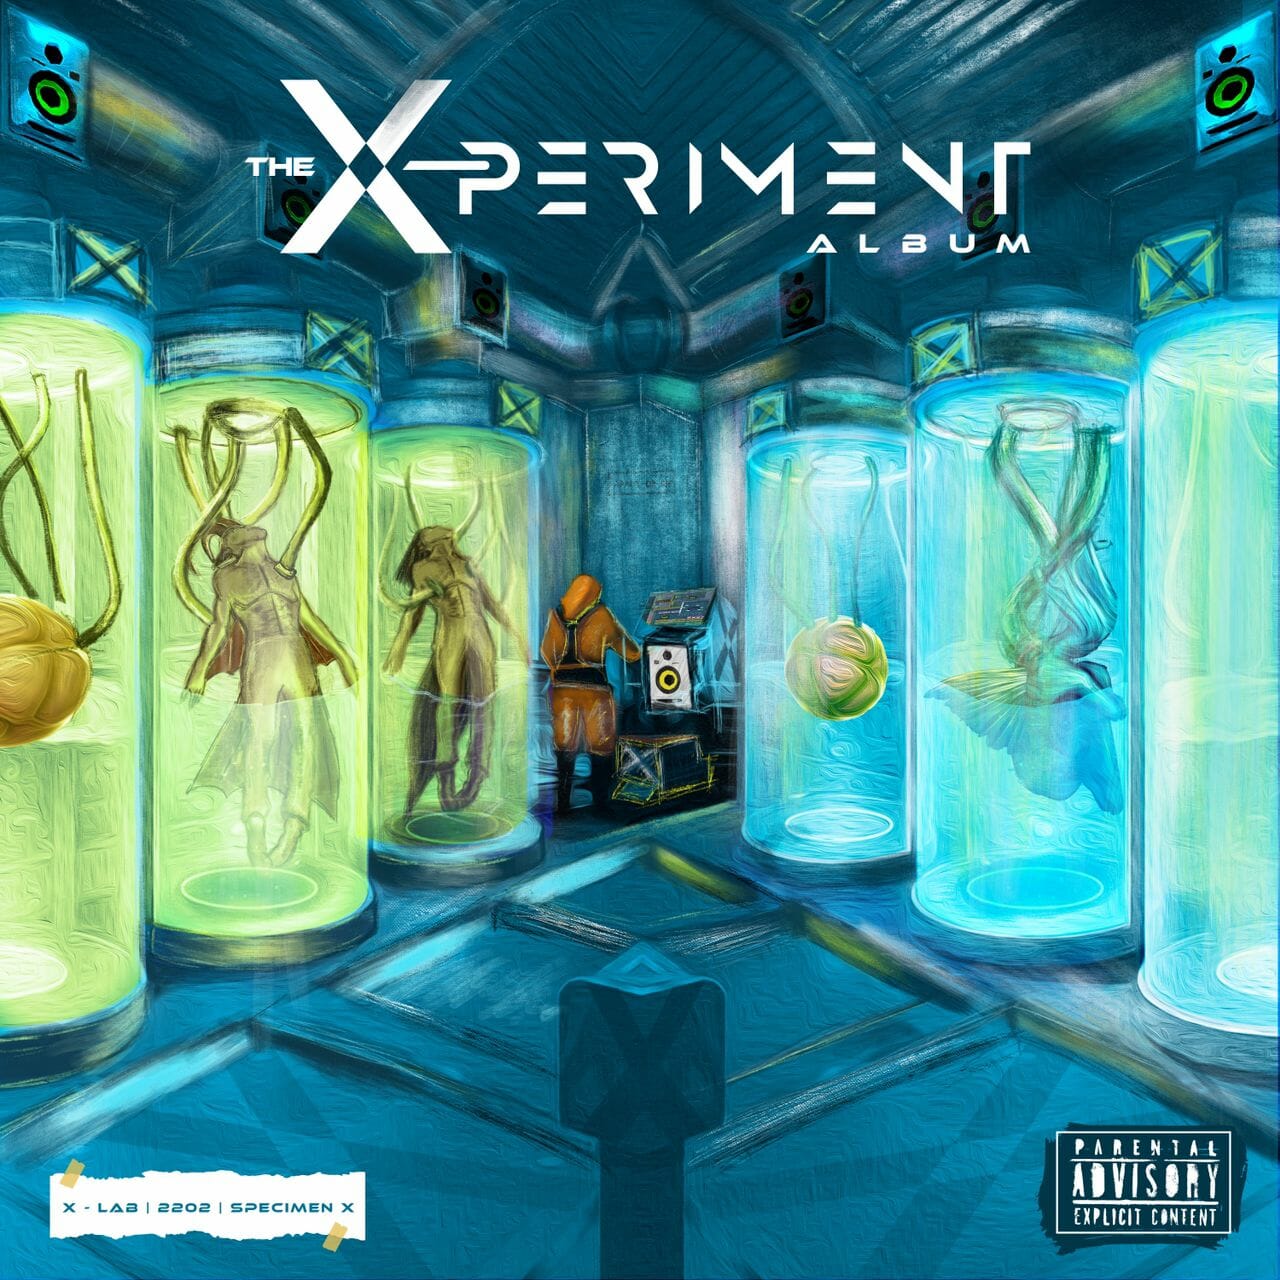 X3M Ideas Sets New Record With ‘The Xperiment’ Album